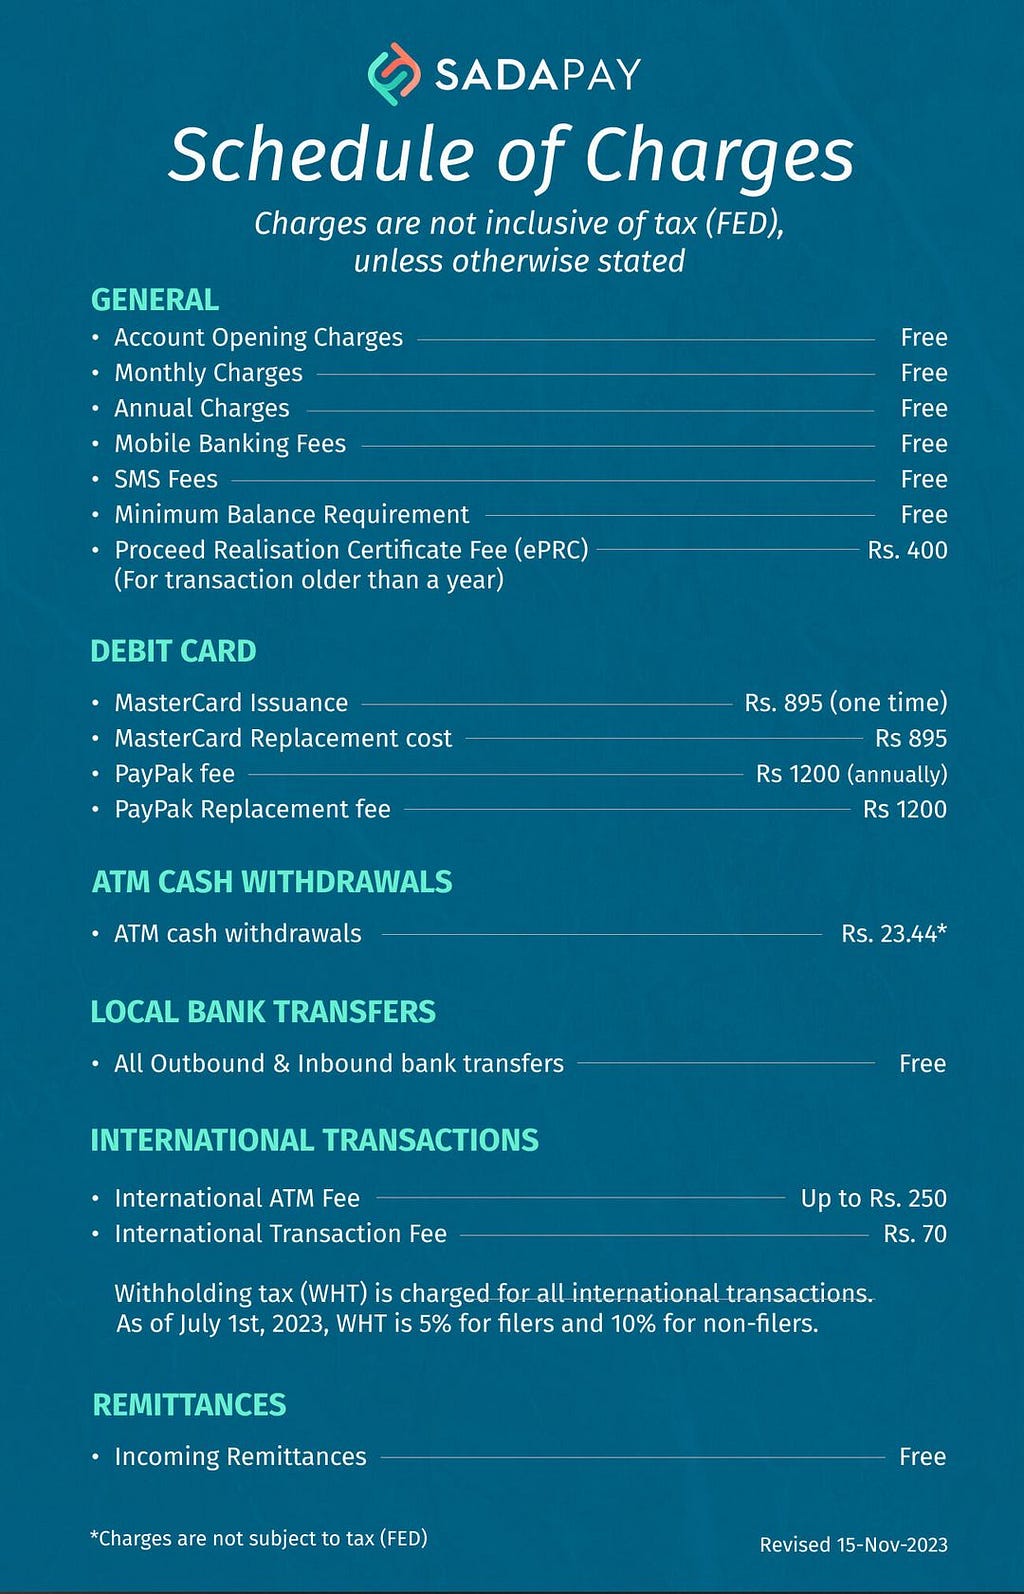 SadaPay Schedule of Charges Update (17th Nov, 2023) | From Blog written on SadaPay — Financial freedom, the Sada way by Umer Farooq, CTO MRS Technologies